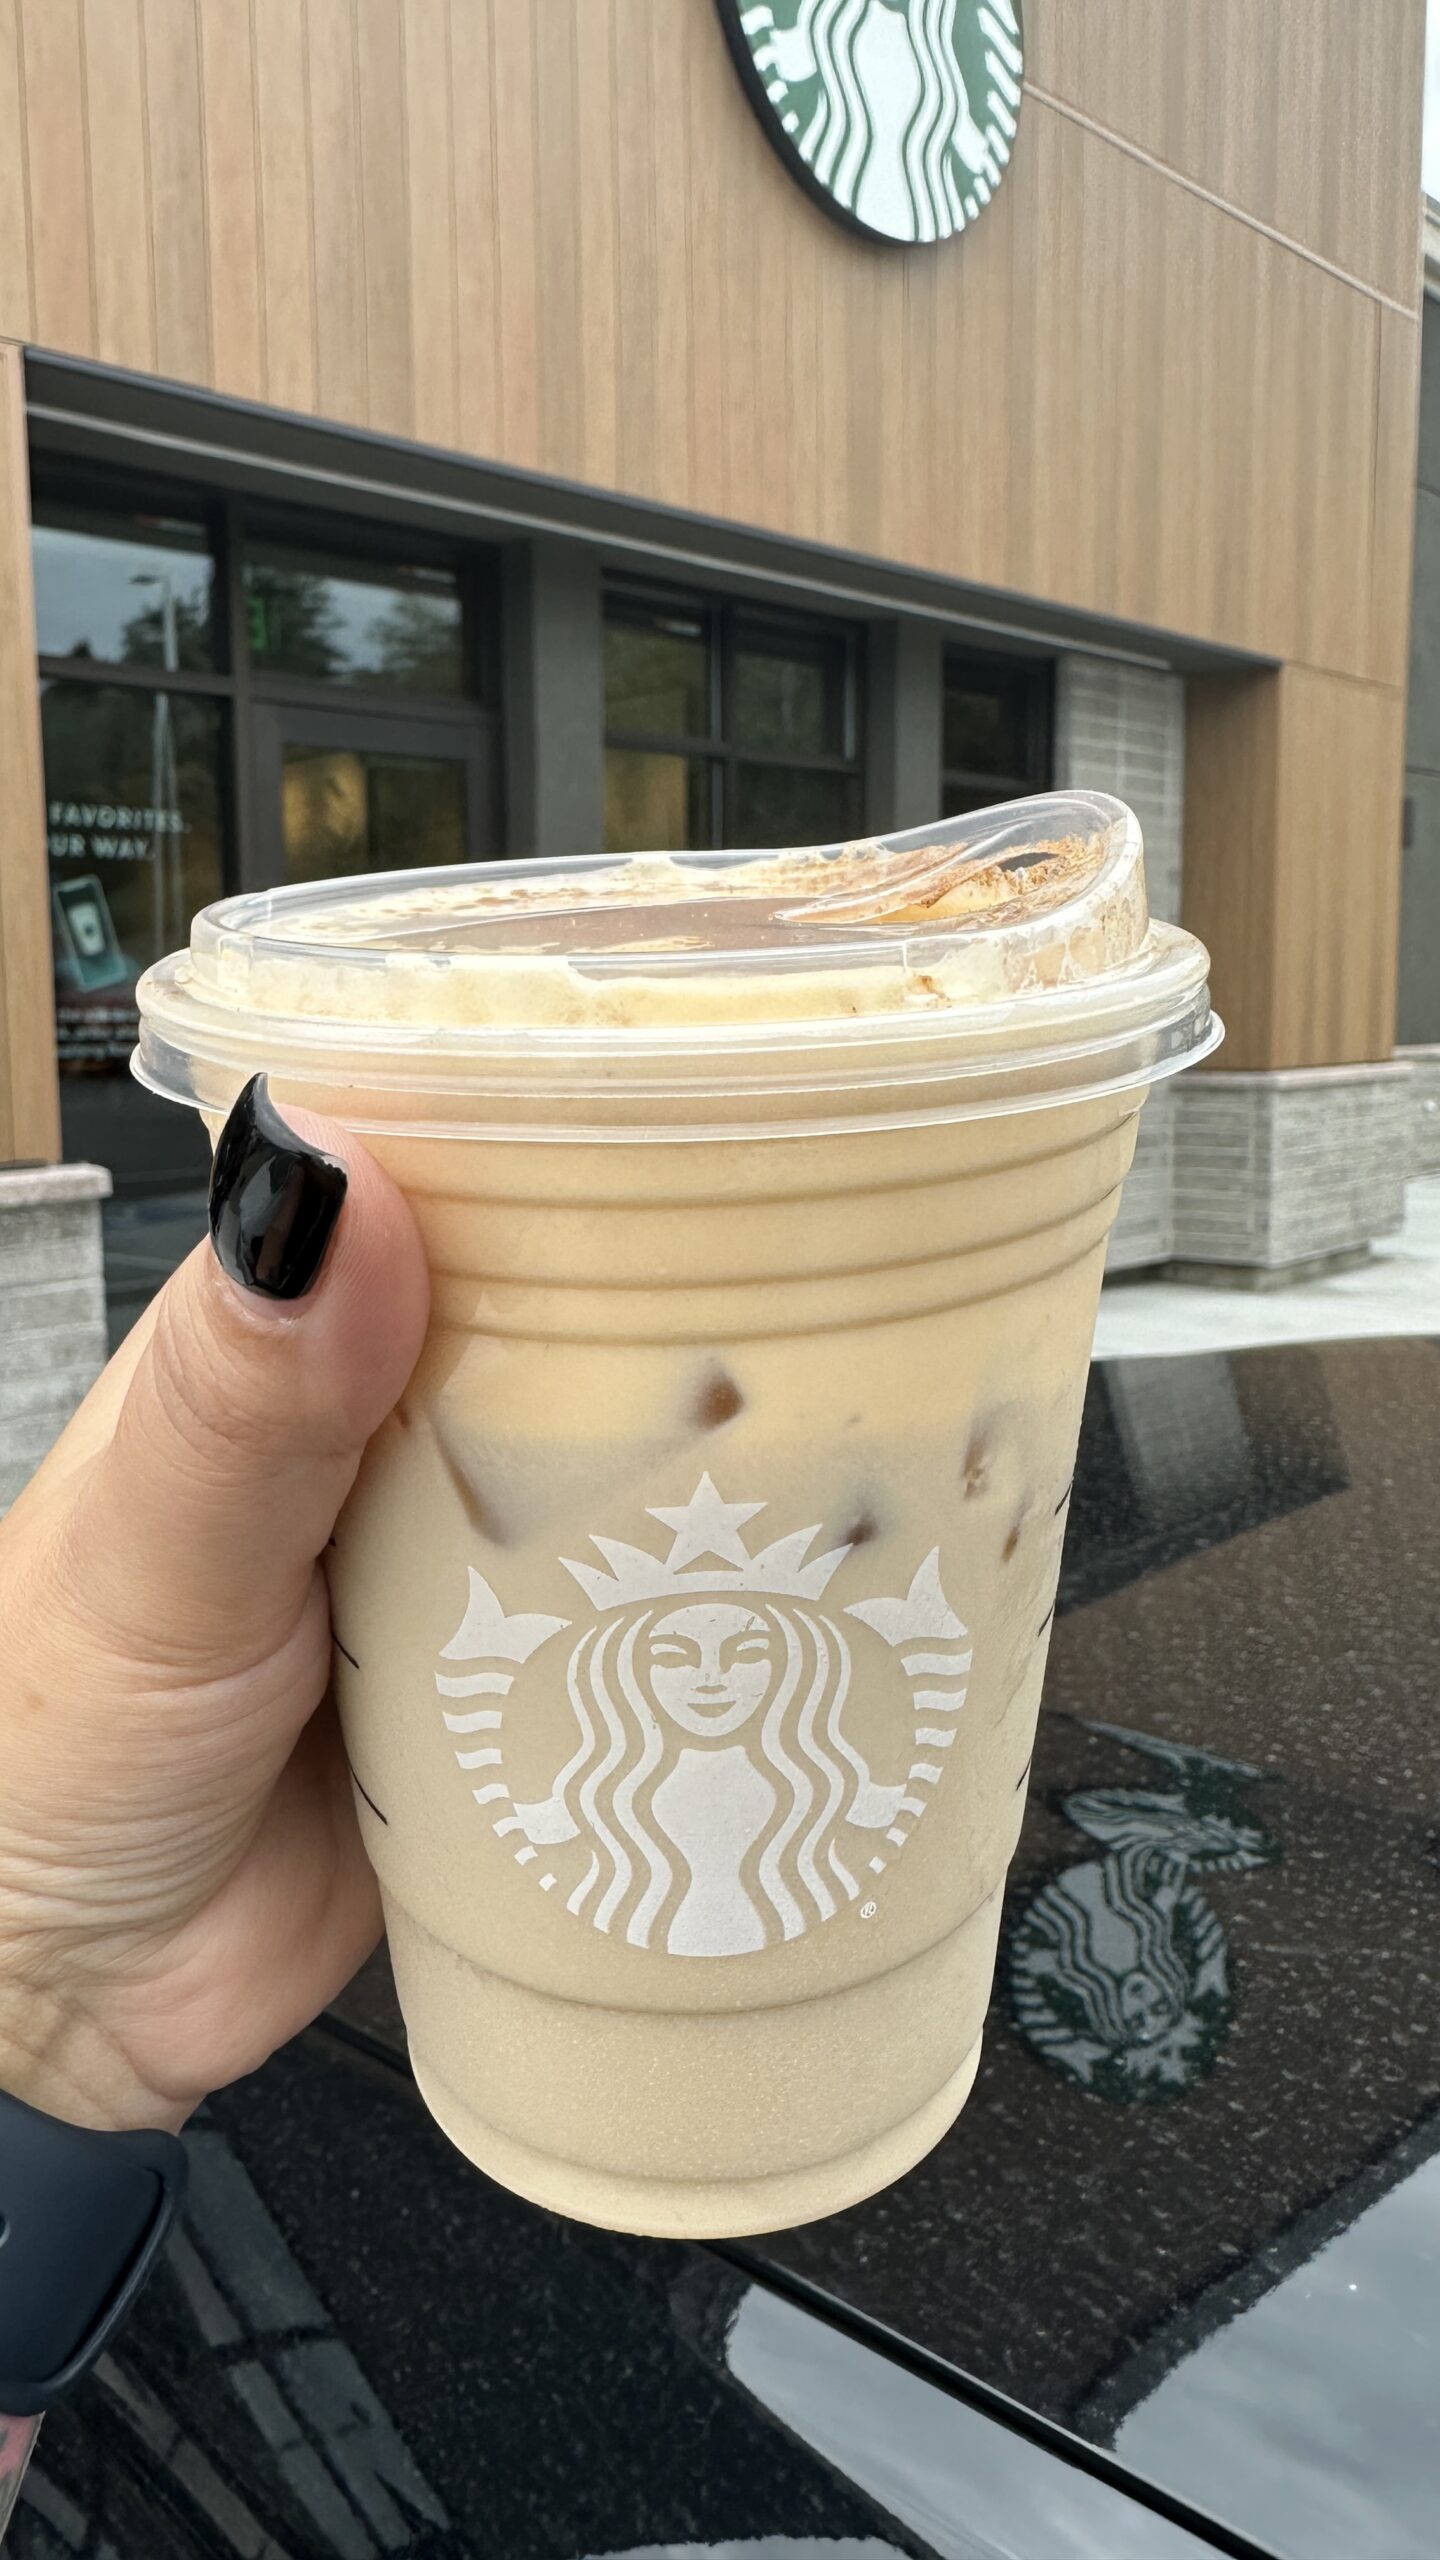 I Tried Starbucks' New Pumpkin Chai Drink. Here's My Honest Thoughts.